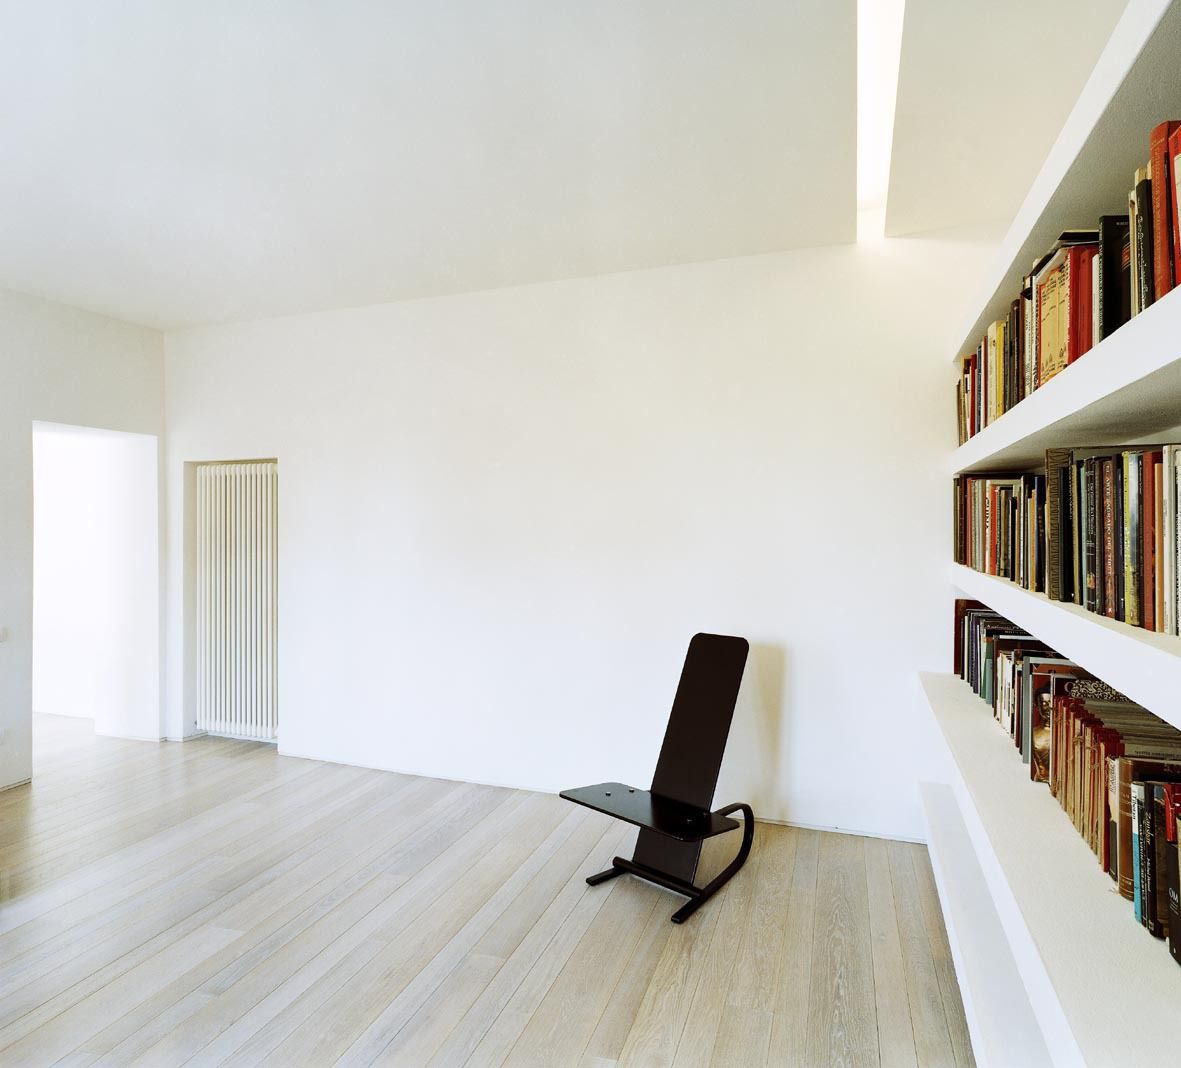 A1 house, vps architetti vps architetti Modern Study Room and Home Office